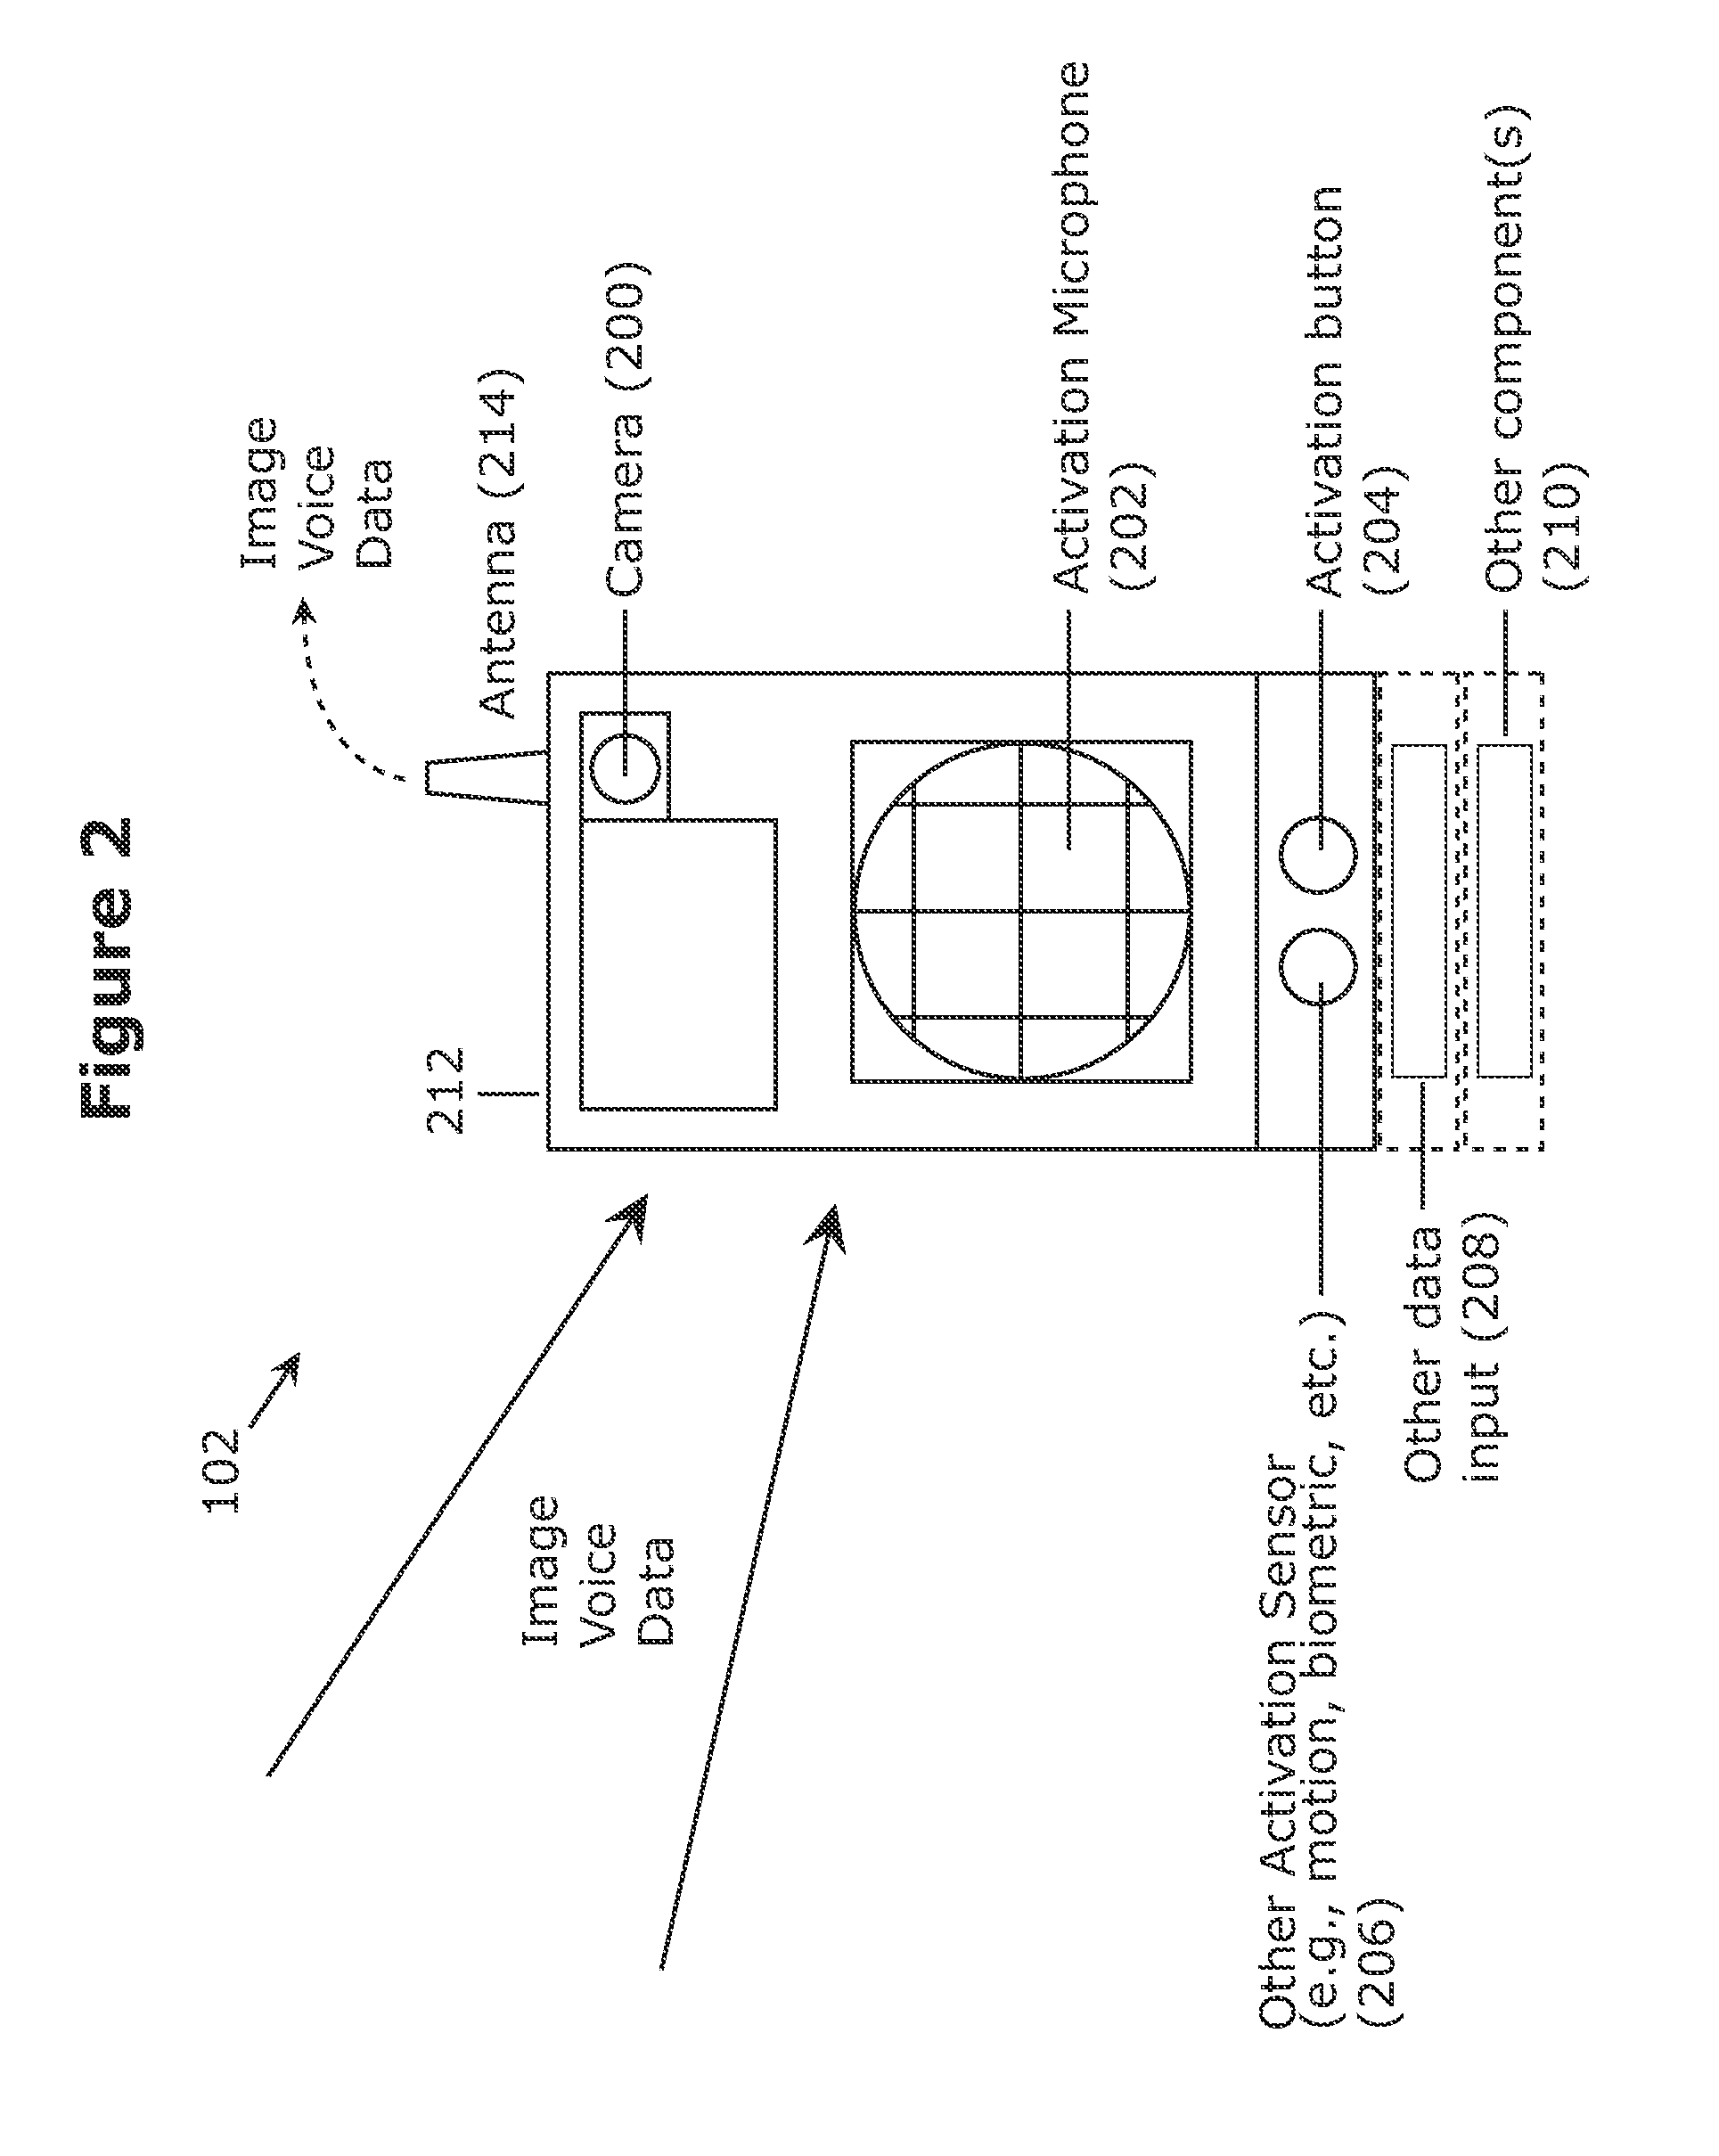 Personal safety system, method, and apparatus